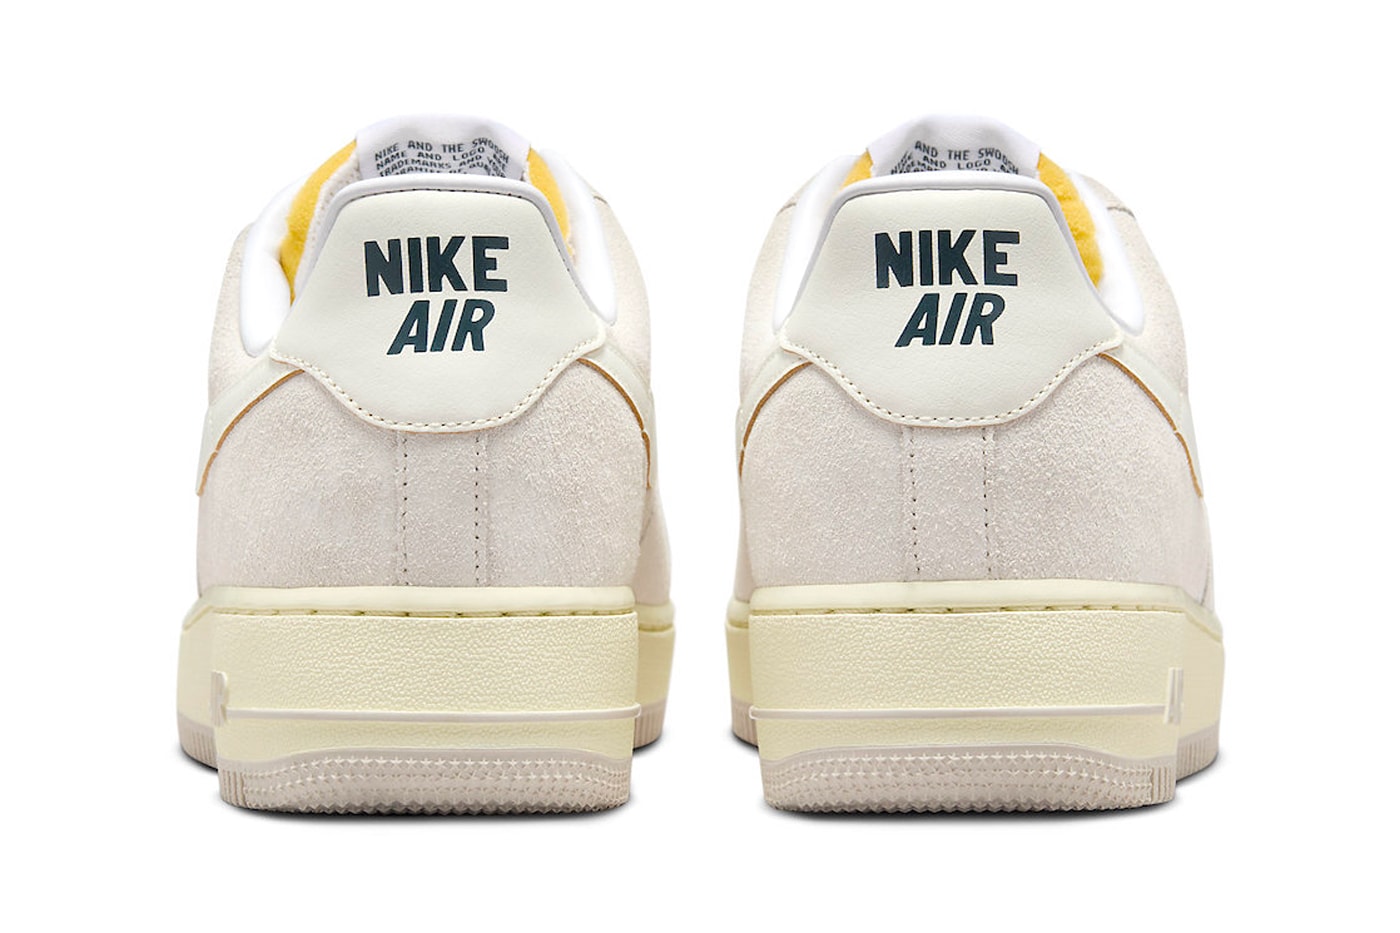 Nike Air Force 1 Low "Athletic Department" Has Officially Released FQ8077-104 Light Orewood Brown/Coconut Milk-Deep Jungle-Sail